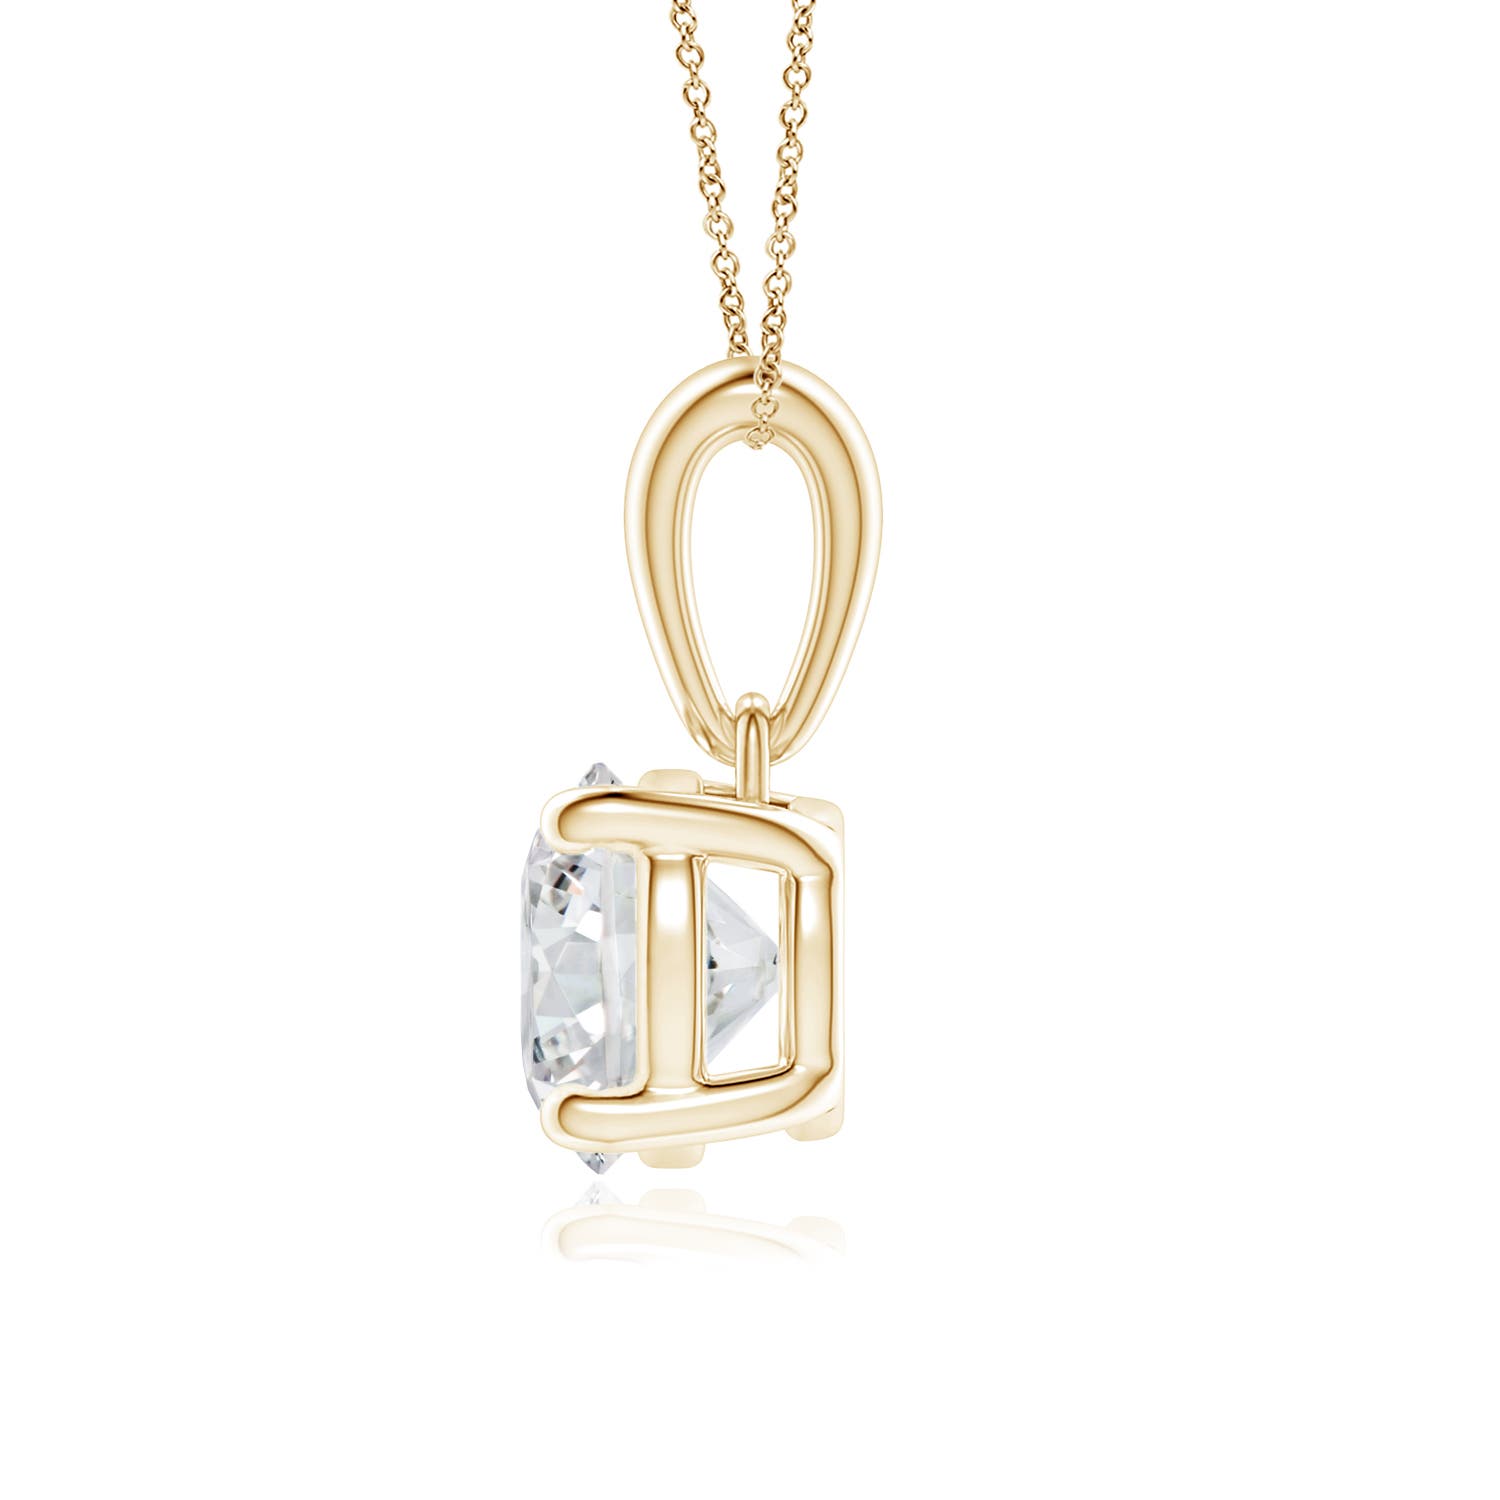 H, SI2 / 1.03 CT / 14 KT Yellow Gold